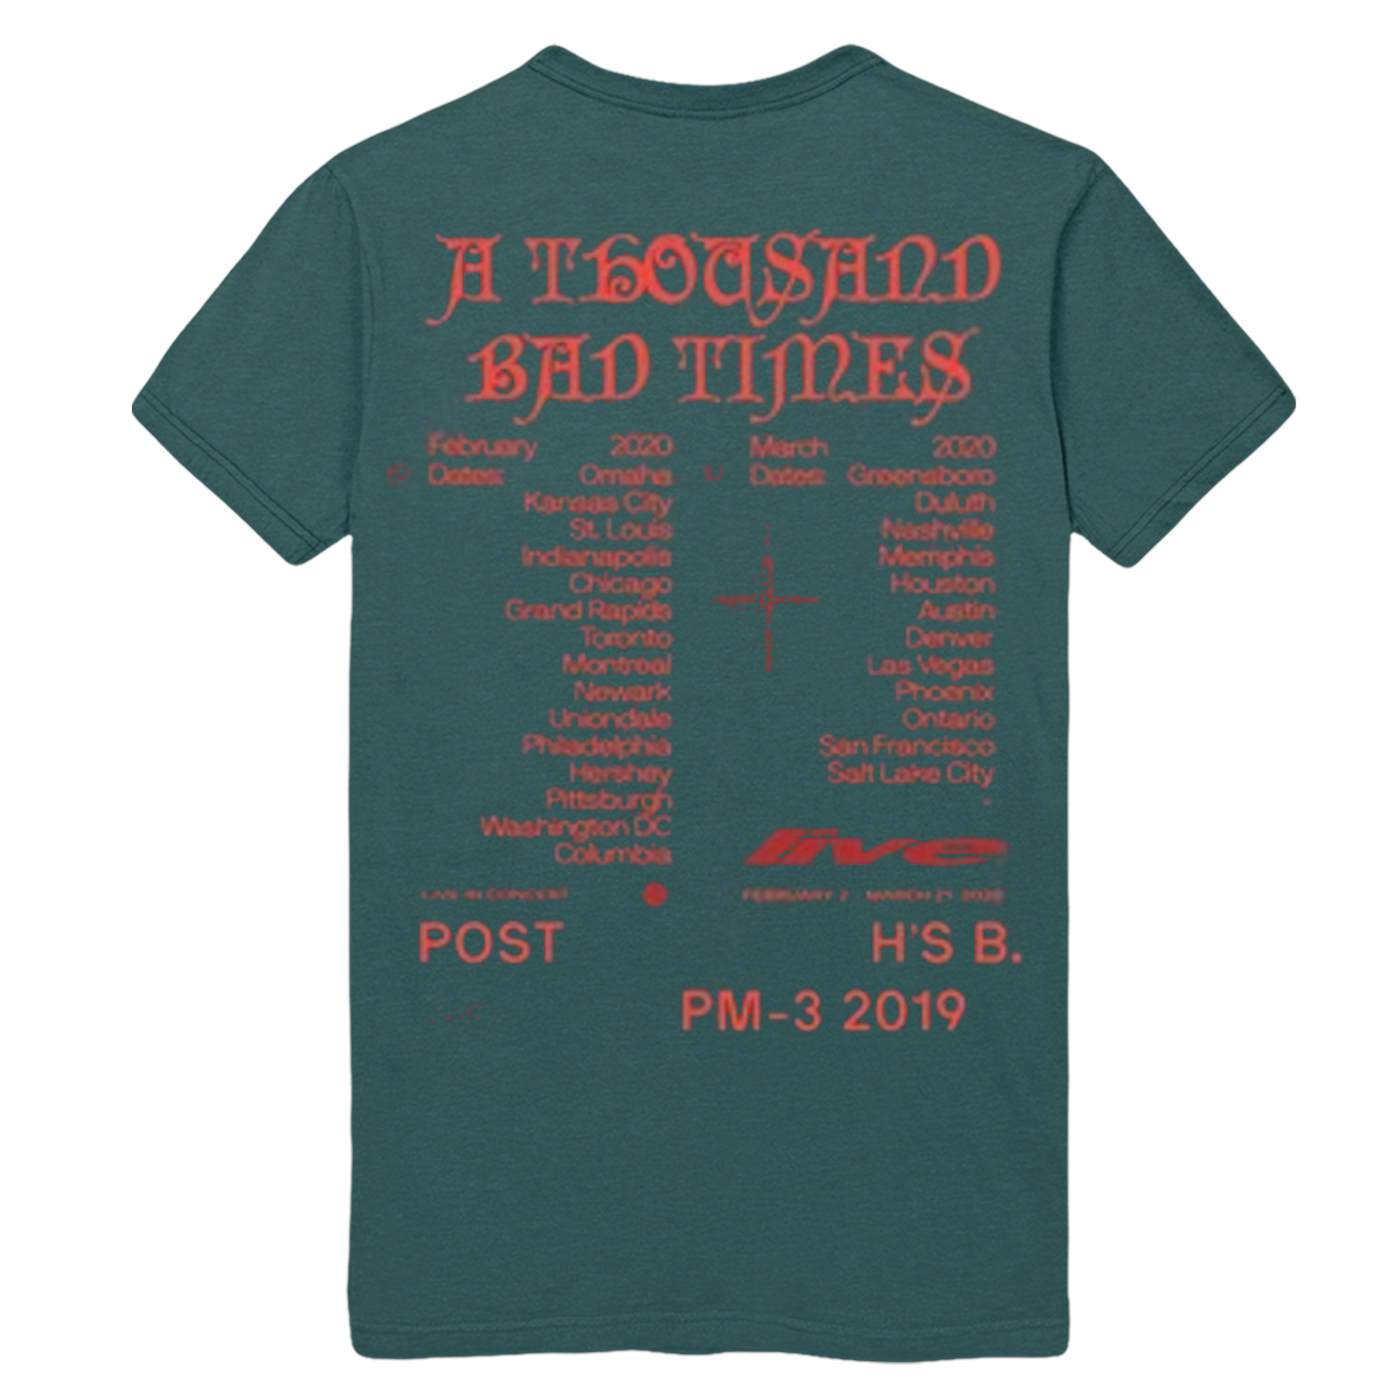 Post Malone A Thousand Bad Times Tour Tee